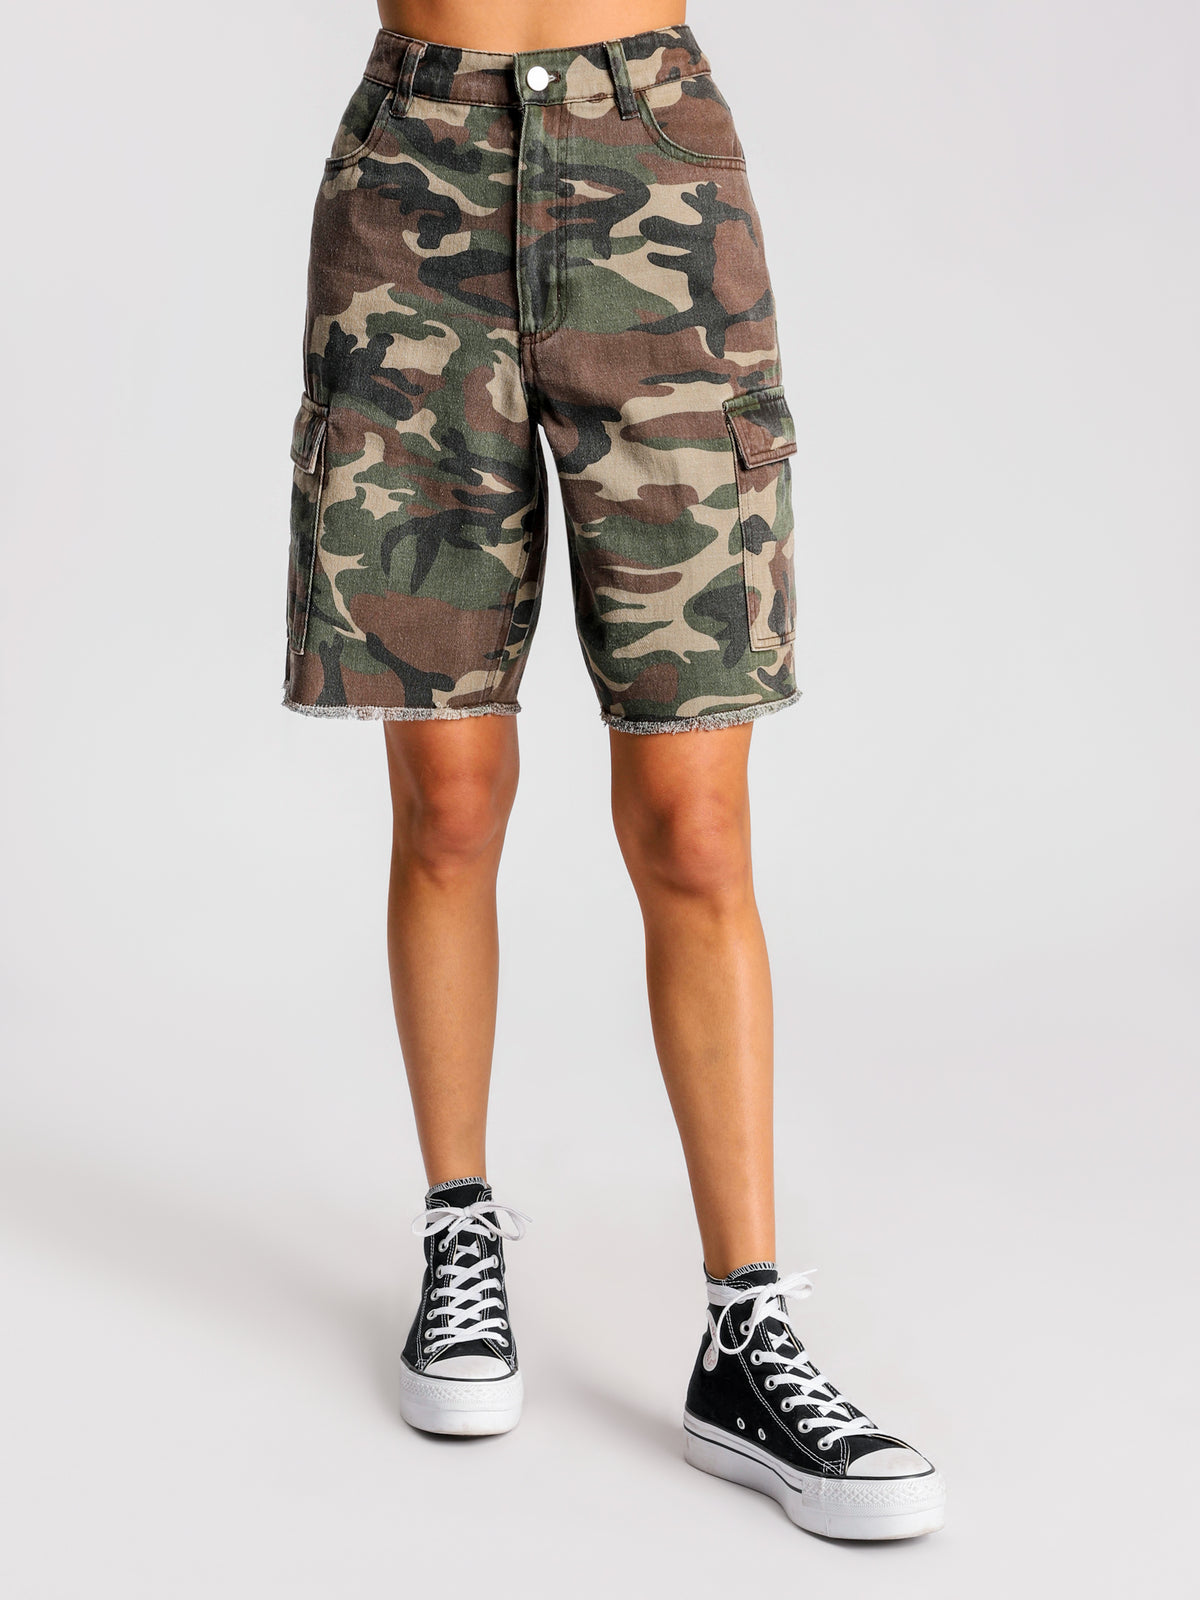 Artillery Shorts in Camouflage